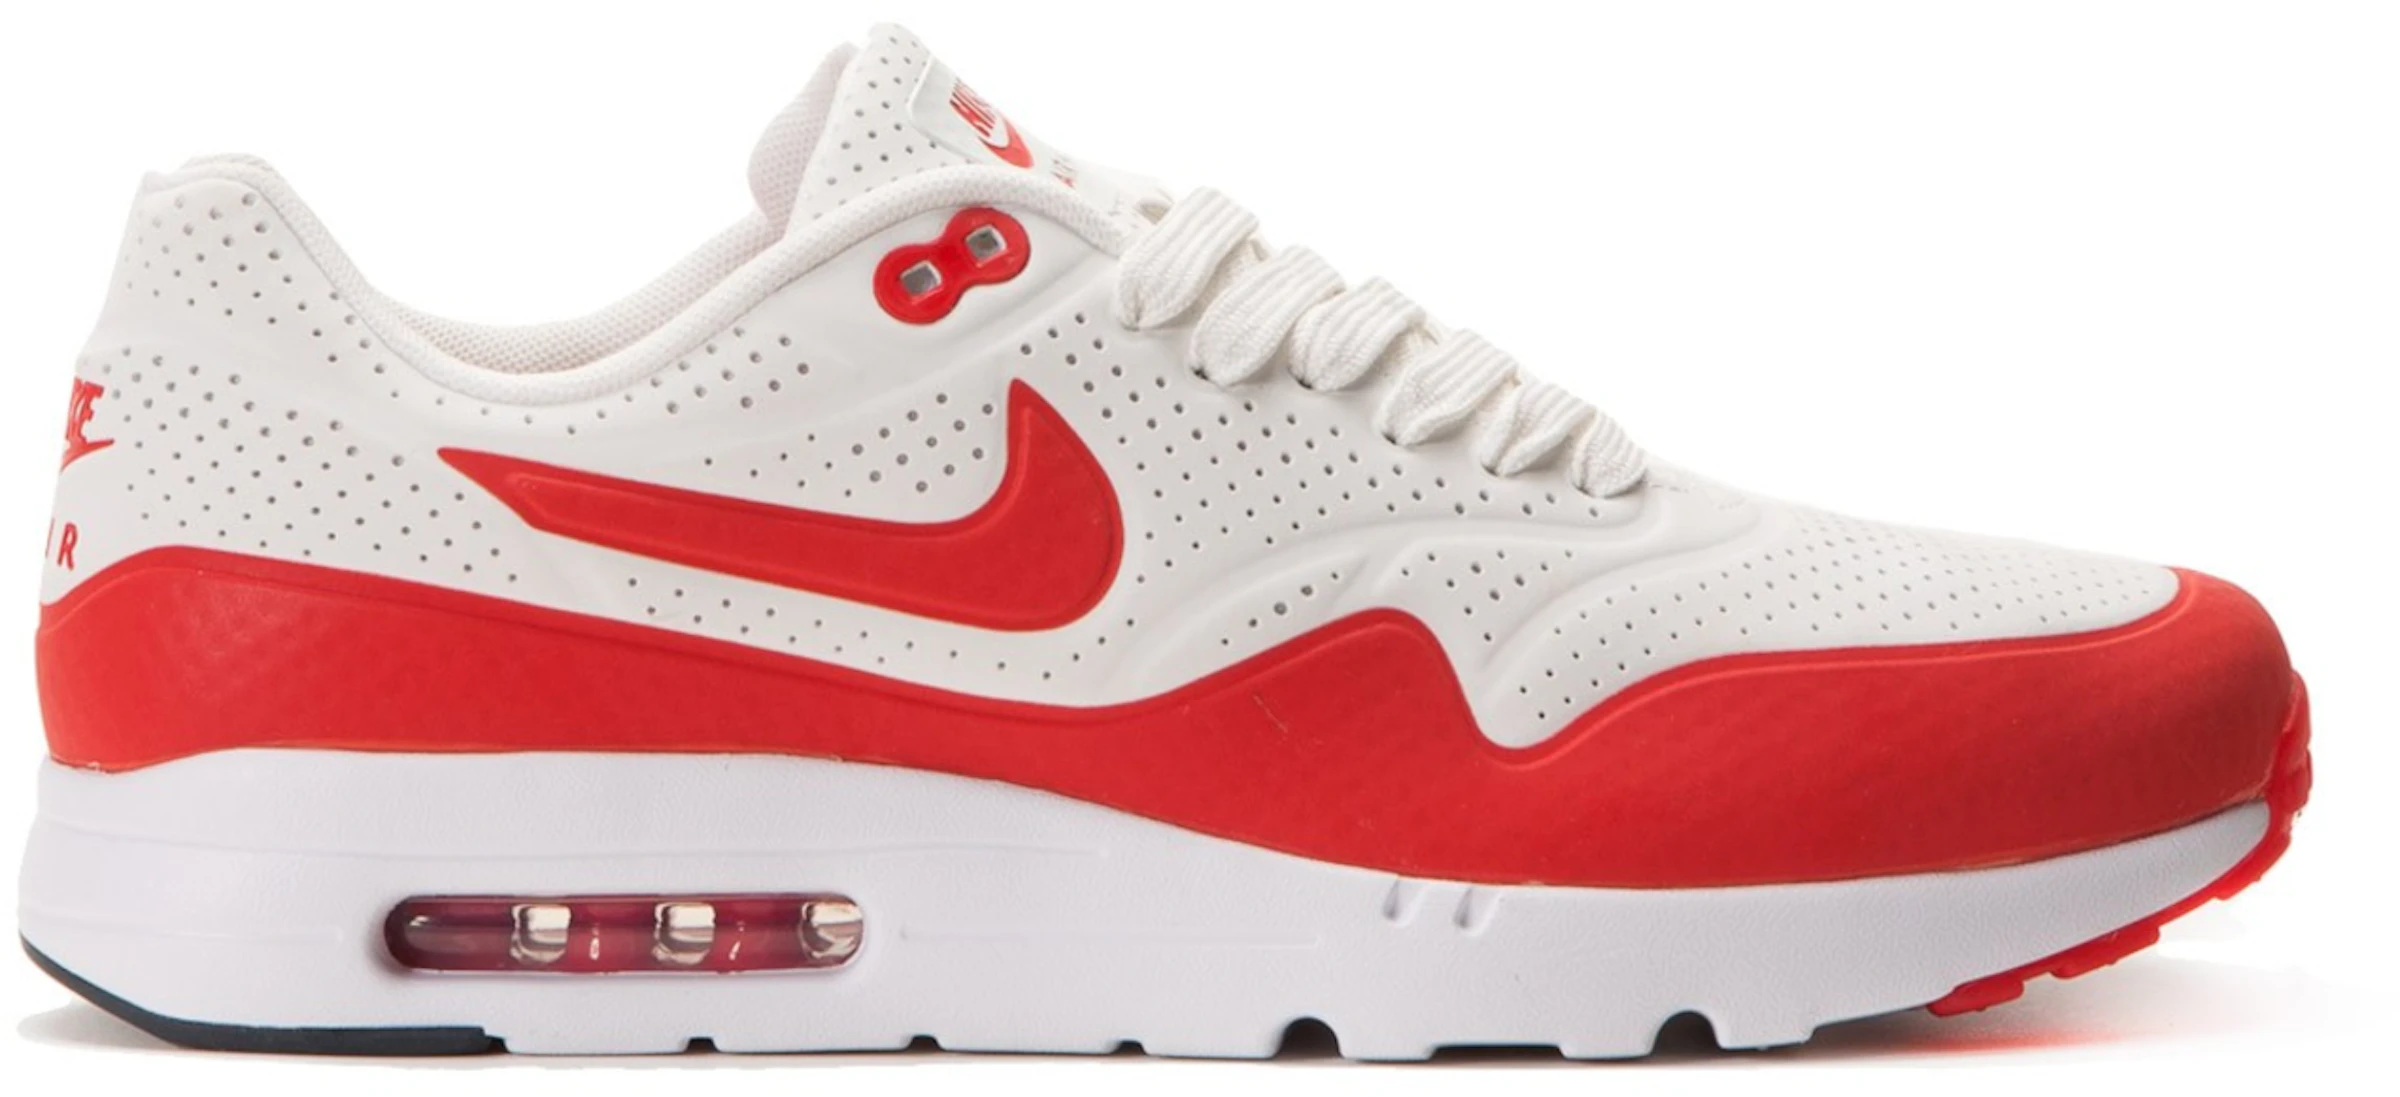 Nike Air 1 Ultra Moire Challenge Red 705297-106 ES